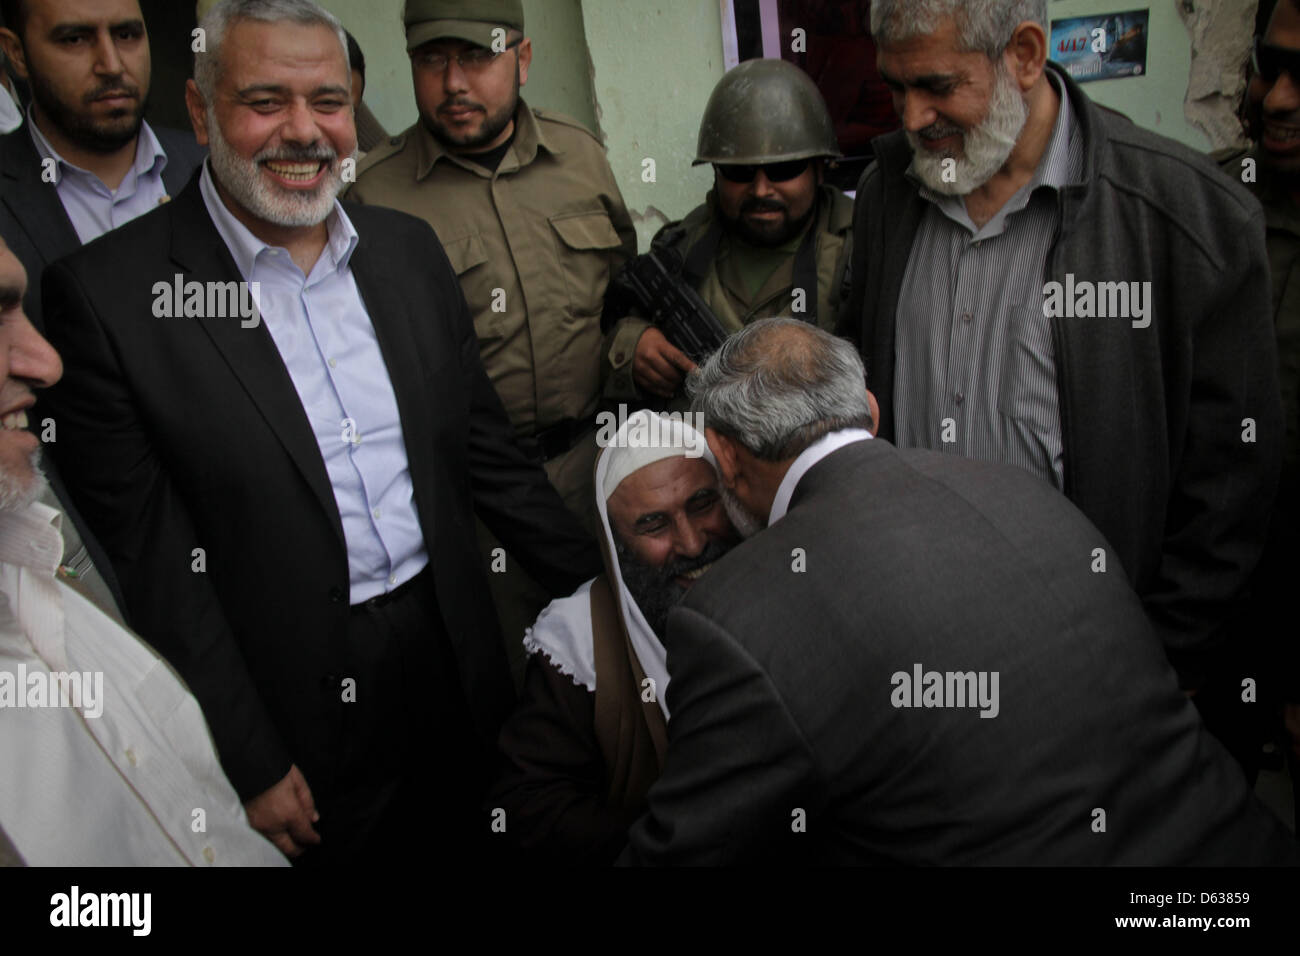 Gaza strip, Gaza City. 11th April 2013.A Palestinian man dressed as late Hamas leader sheikh Ahmed Yassin inside a prison in Gaza City that had been used by Israeli security services to keep Palestinian prisoners during Israel's occupation of Gaza Strip. Credit: Ahmed Deeb / Alamy Live News Stock Photo